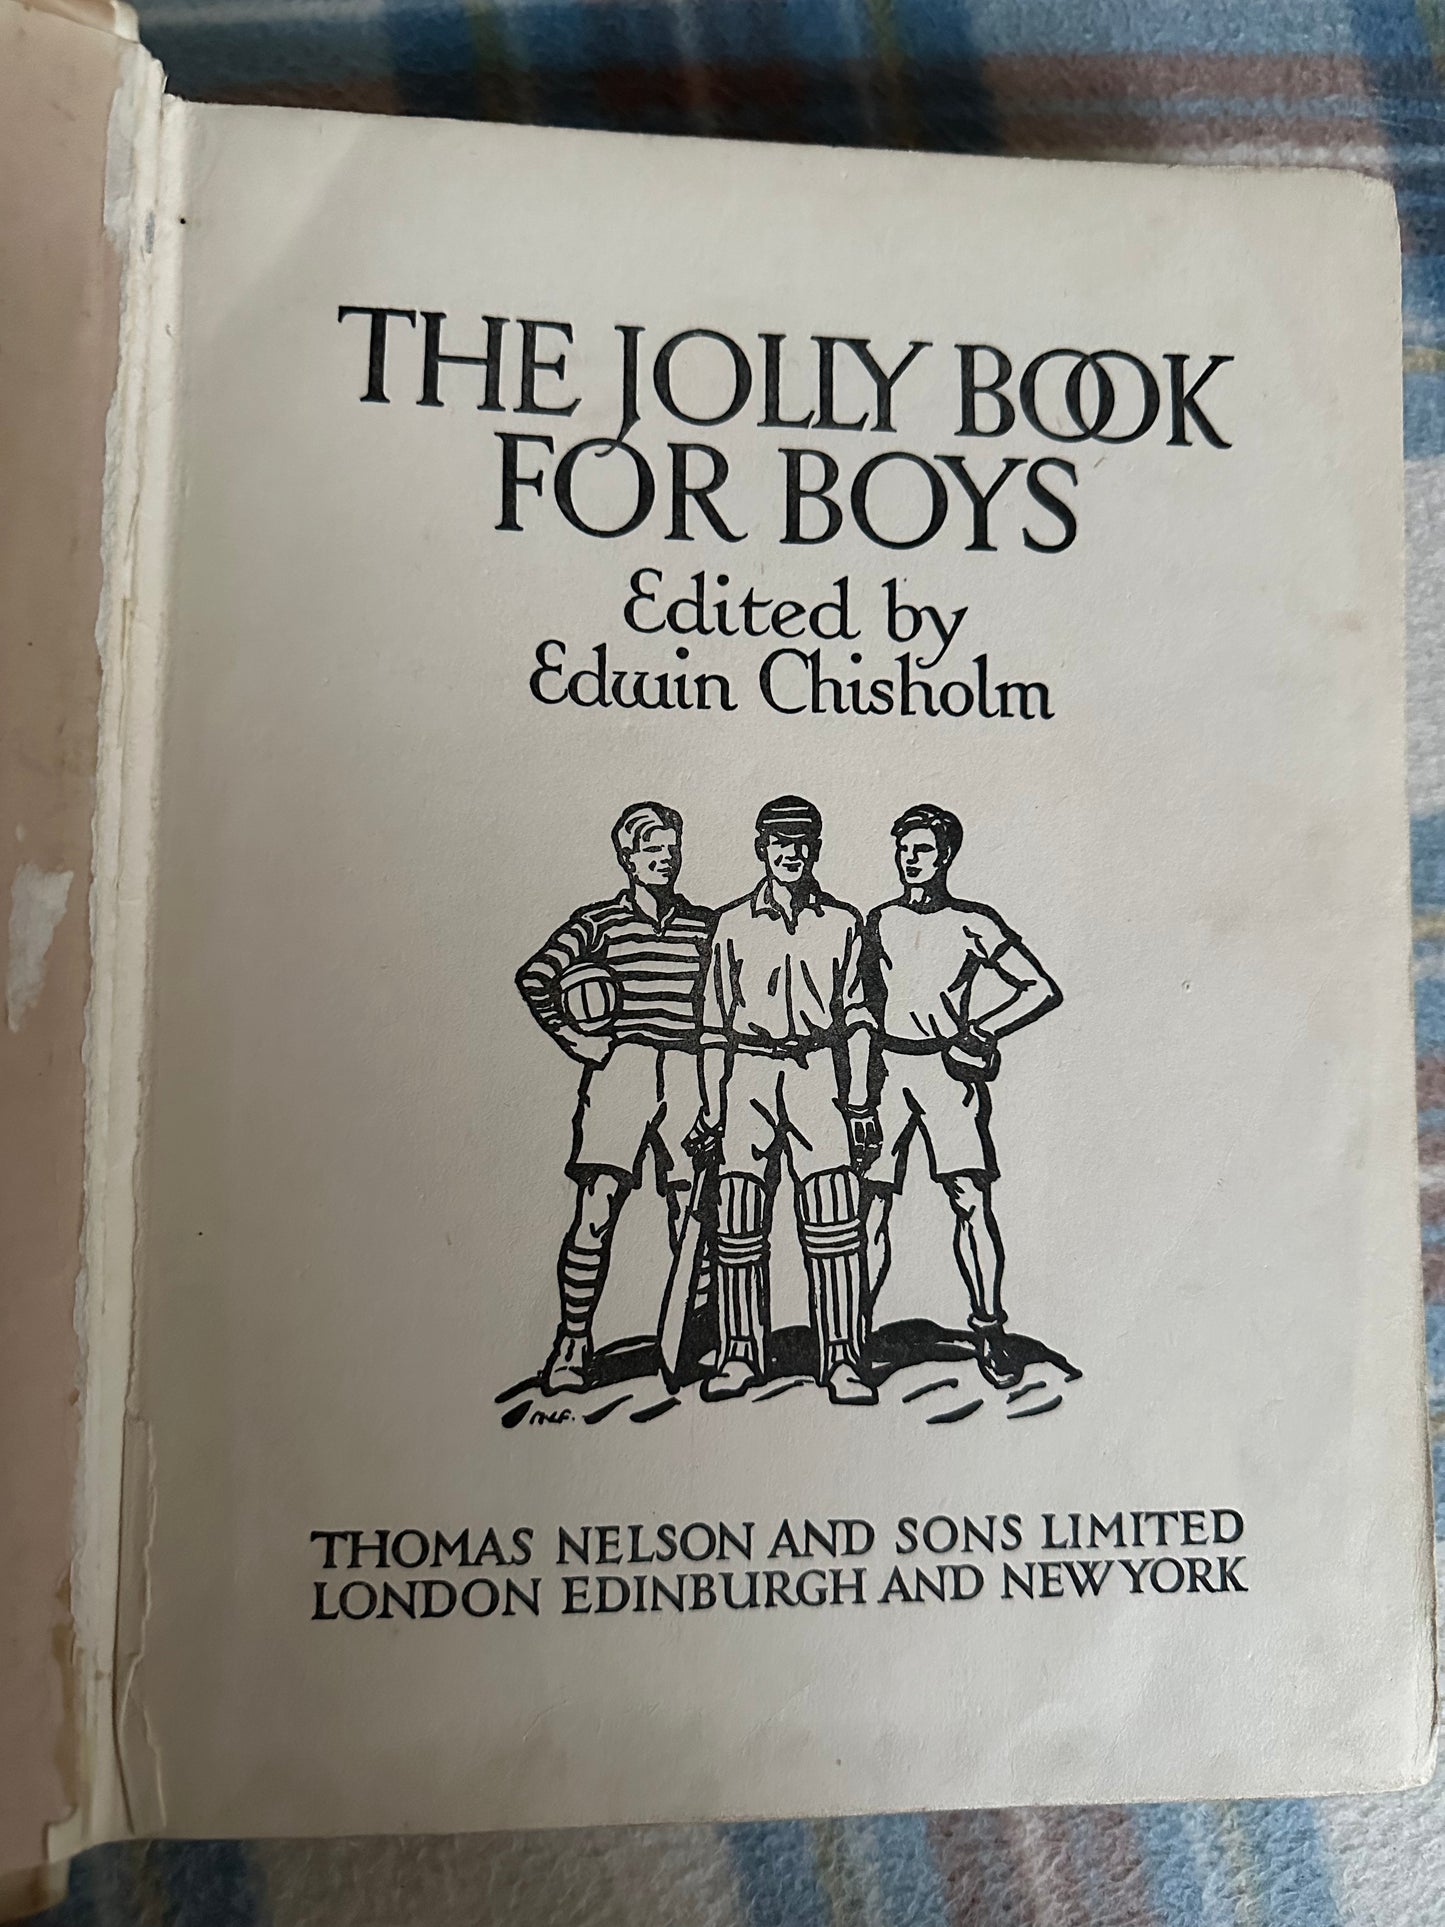 1920 The Jolly Book For Boys - Edwin Chisholm(Thomas Nelson & Sons Ltd)